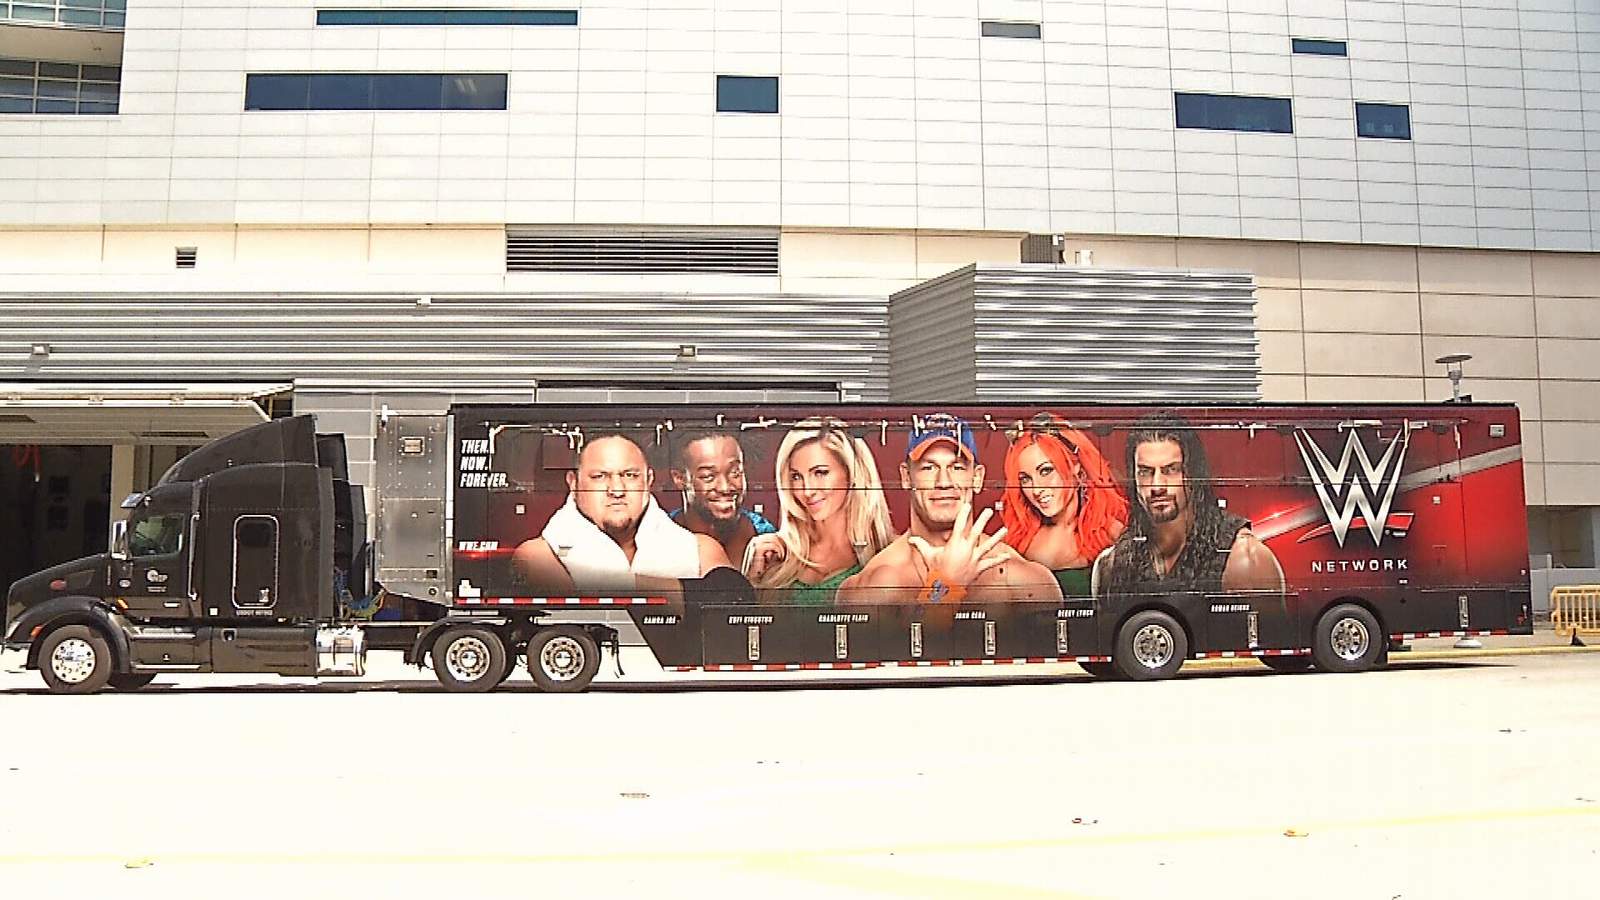 WWE to run shows at Amway Center for 2 months